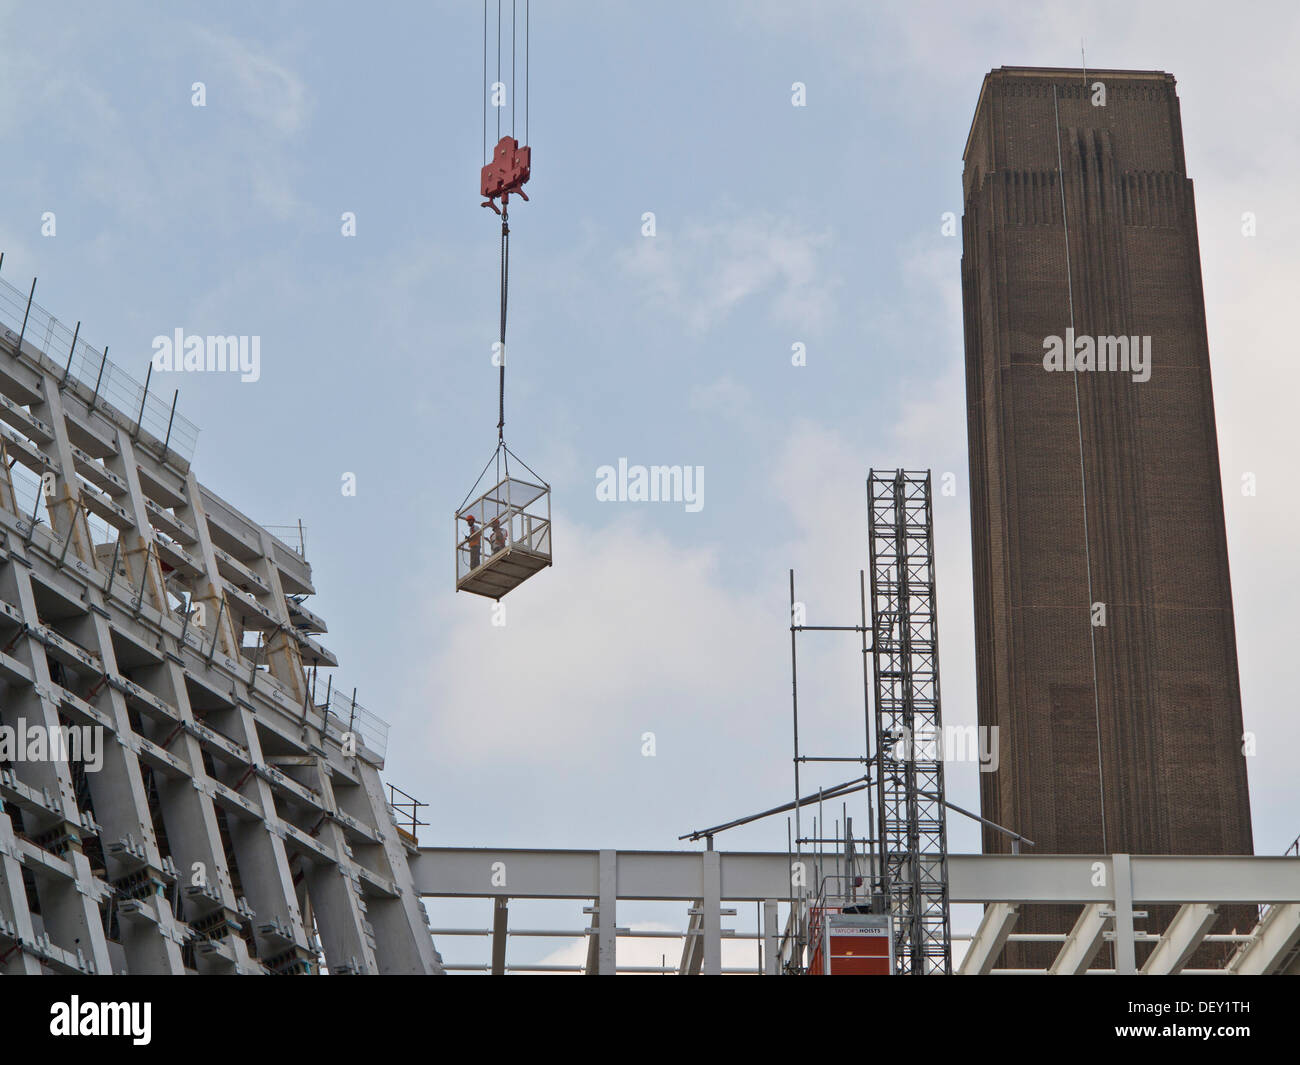 Building work for new extension to Tate Modern gallery in London, due to open in 2014 Stock Photo